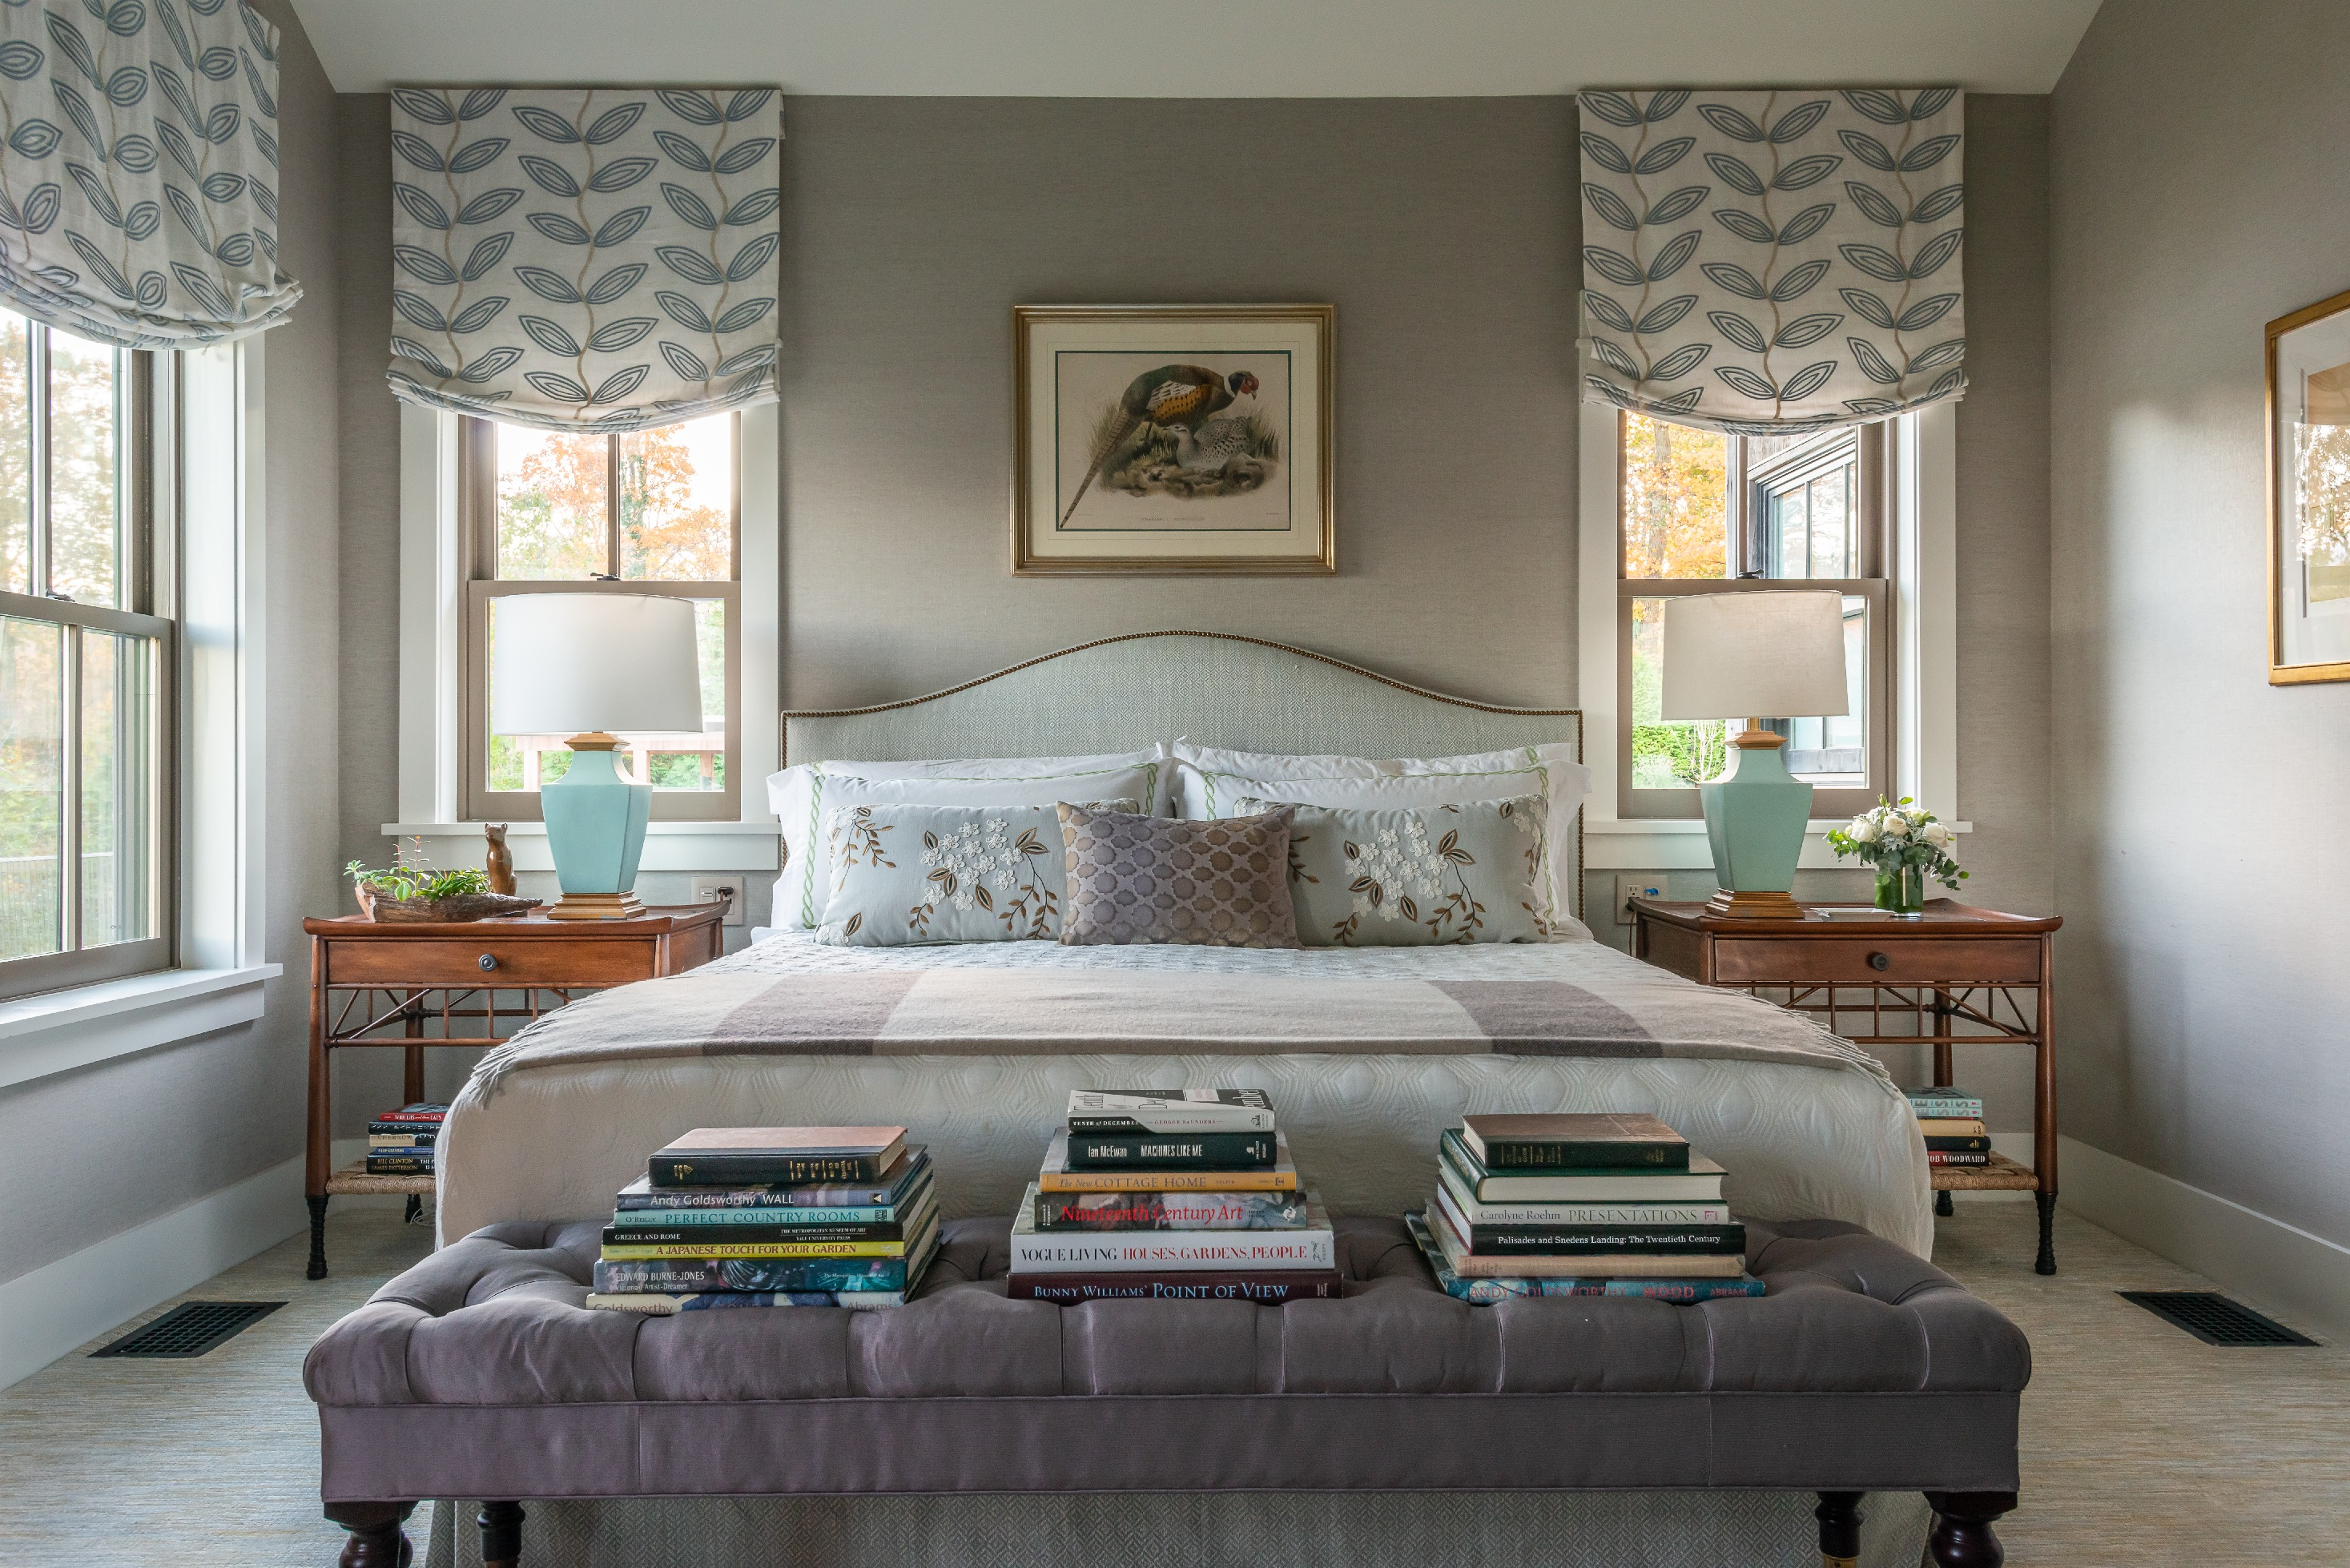  Transitional Vacation Home Bedroom. Snedens Landing Residence by Alan Tanksley, Inc..